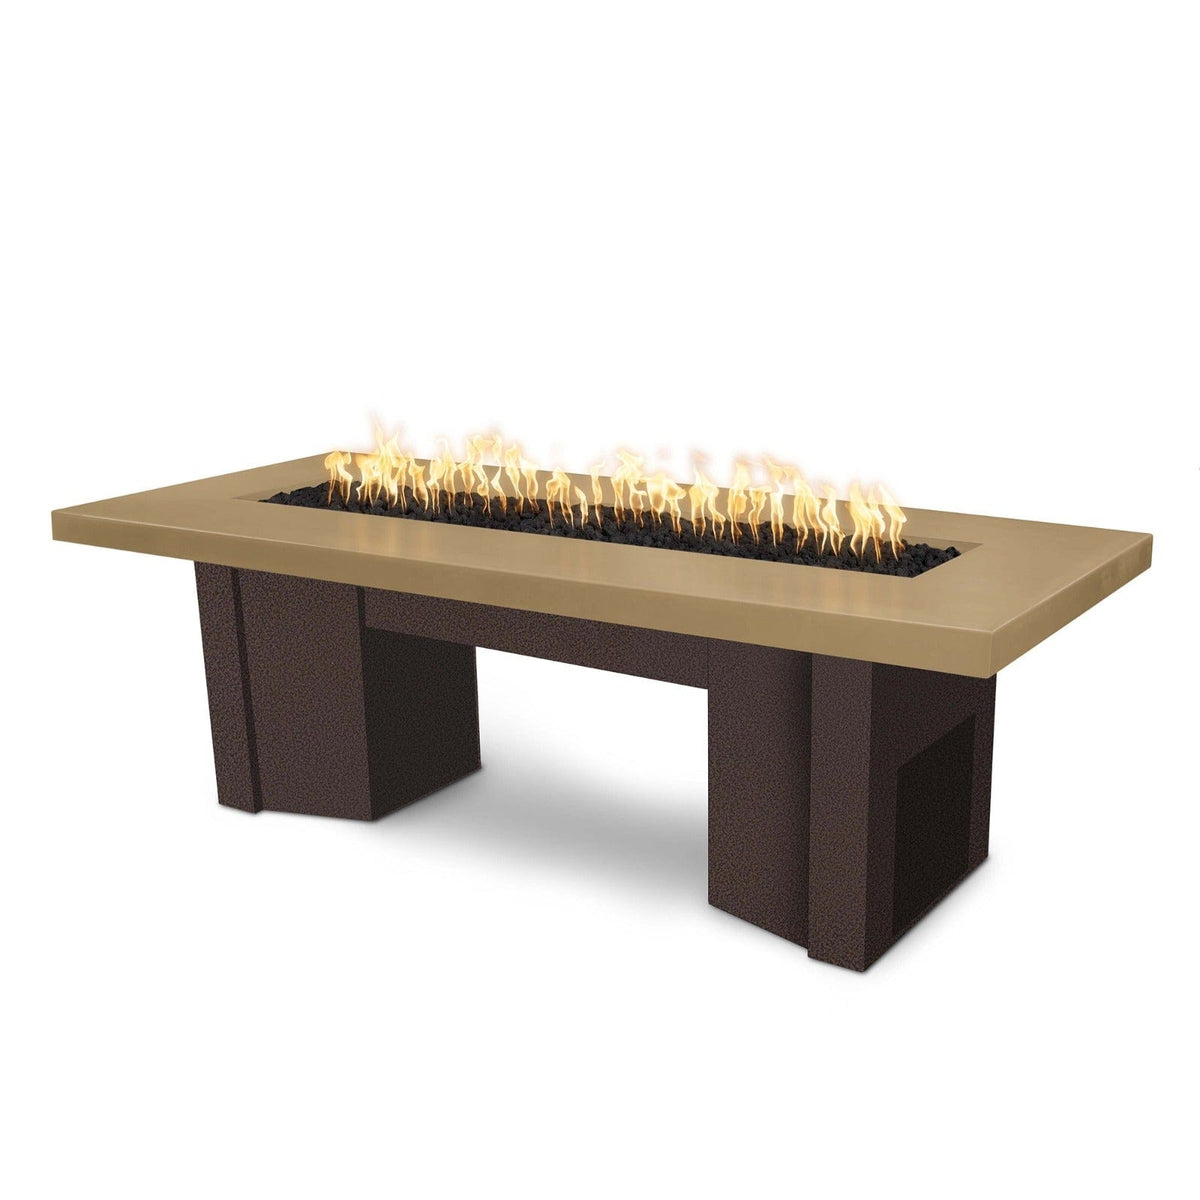 The Outdoor Plus Fire Features Brown (-BRN) / Copper Vein Powder Coated Steel (-CPV) The Outdoor Plus 60&quot; Alameda Fire Table Smooth Concrete in Liquid Propane - Match Lit / OPT-ALMGFRC60-LP